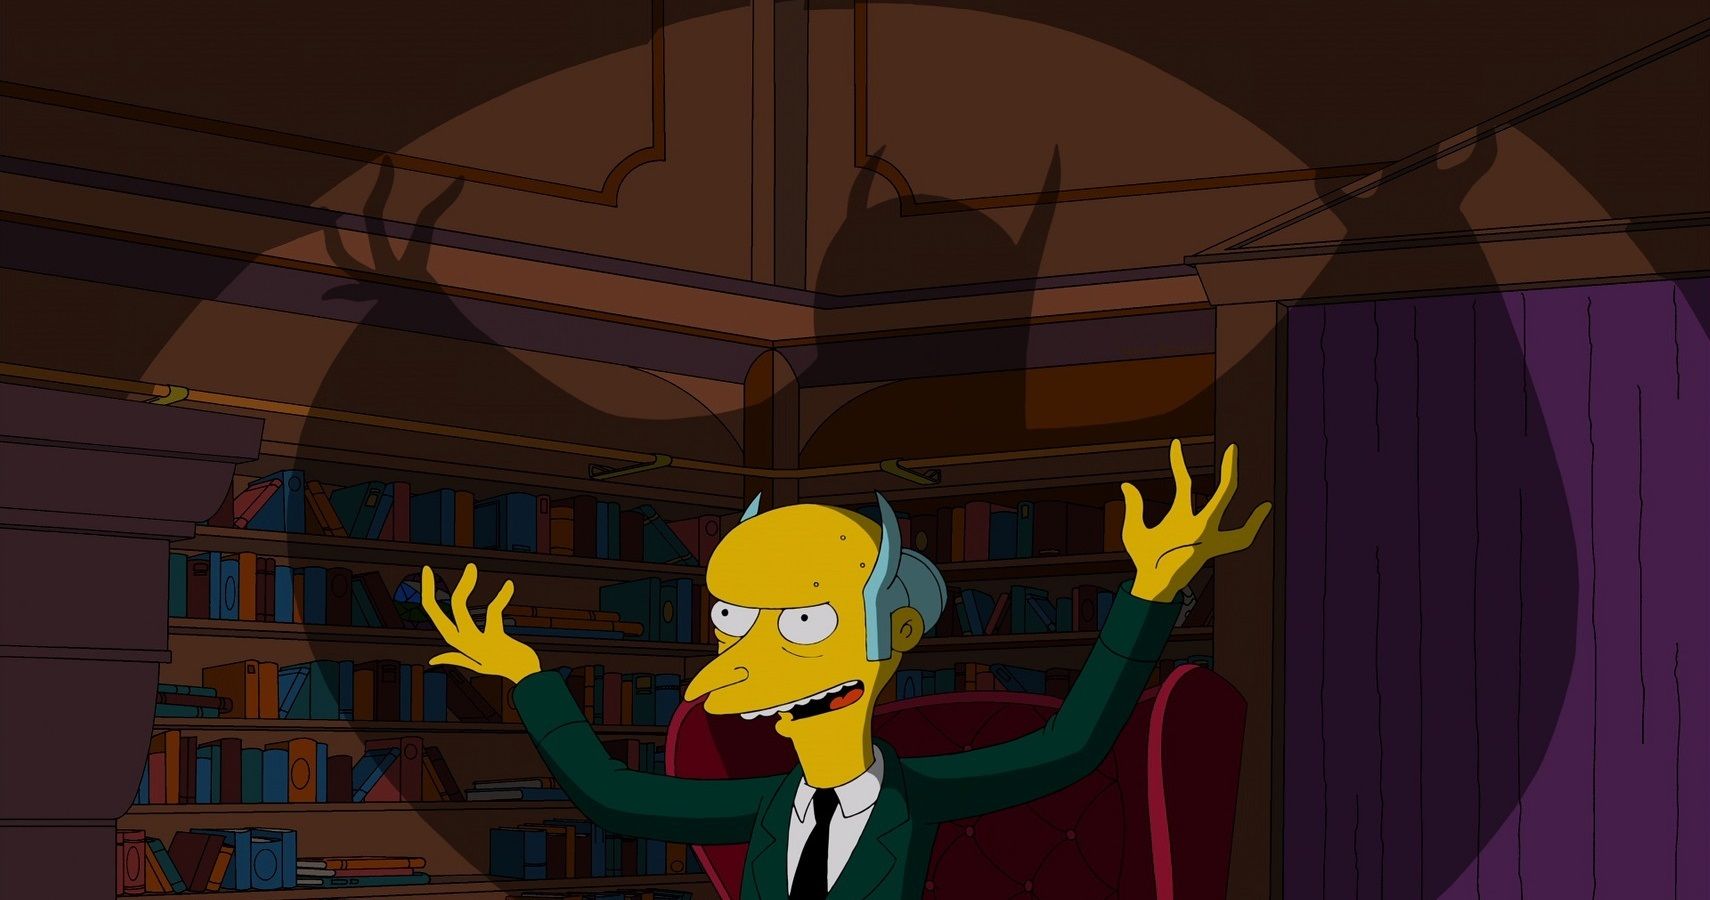 The Simpsons The 10 Worst Things That Mr Burns Has Ever Done